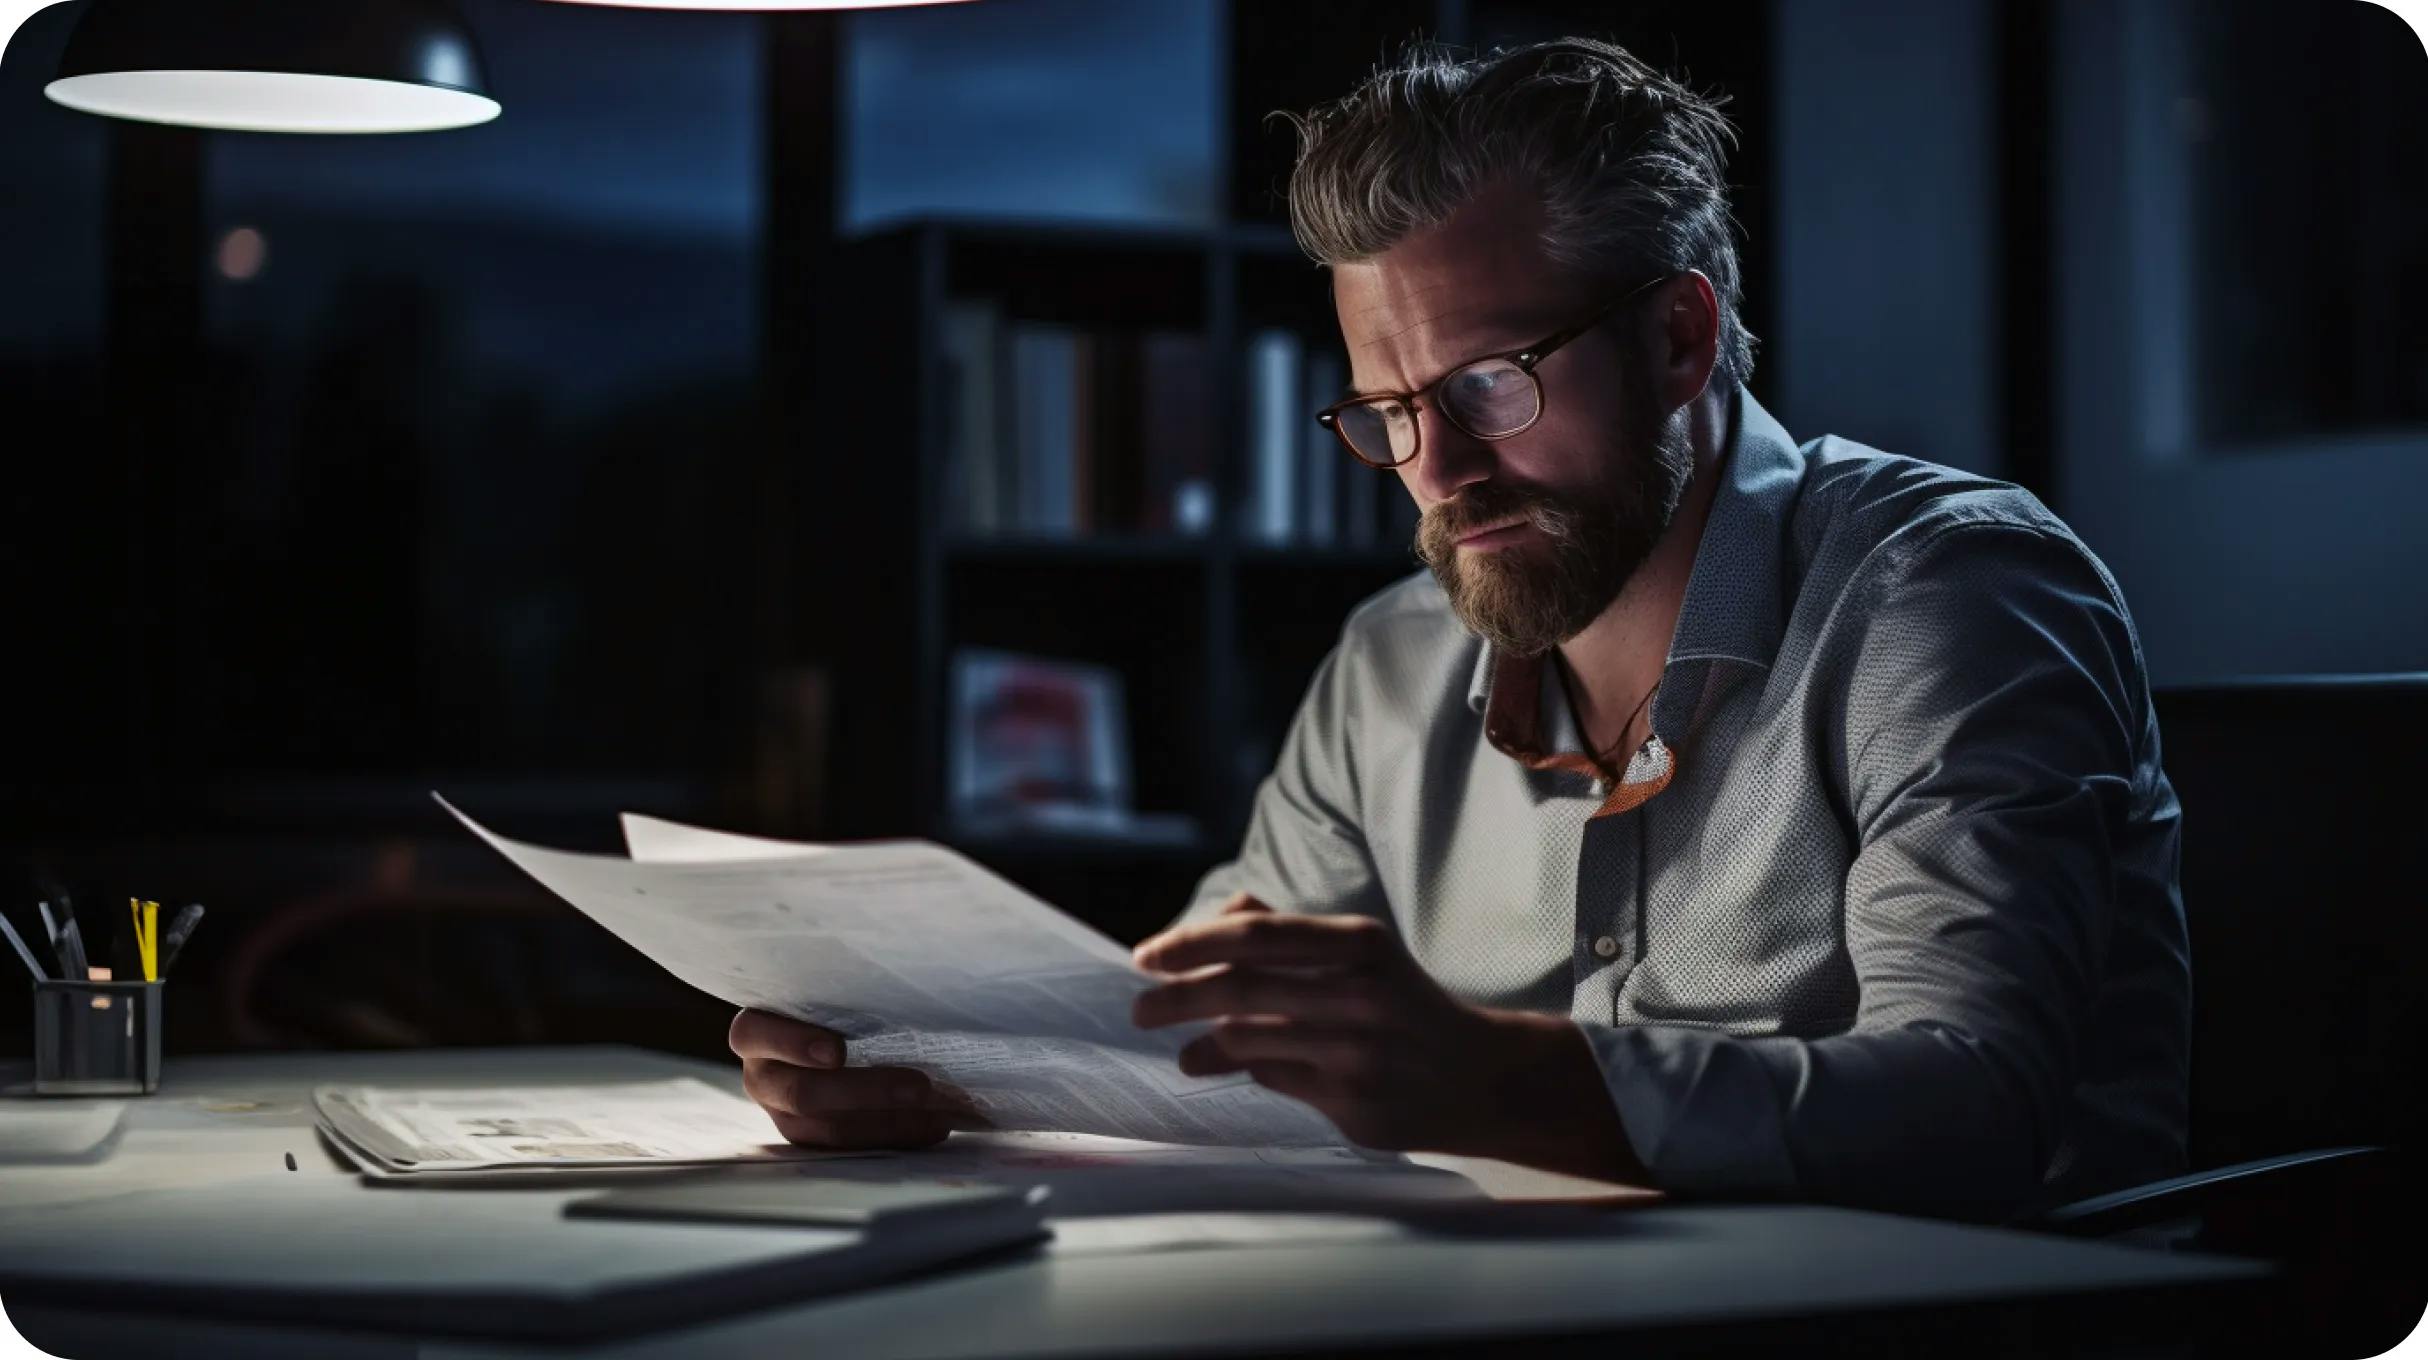 A man working at night in a dark room, reading some papers by a desk light